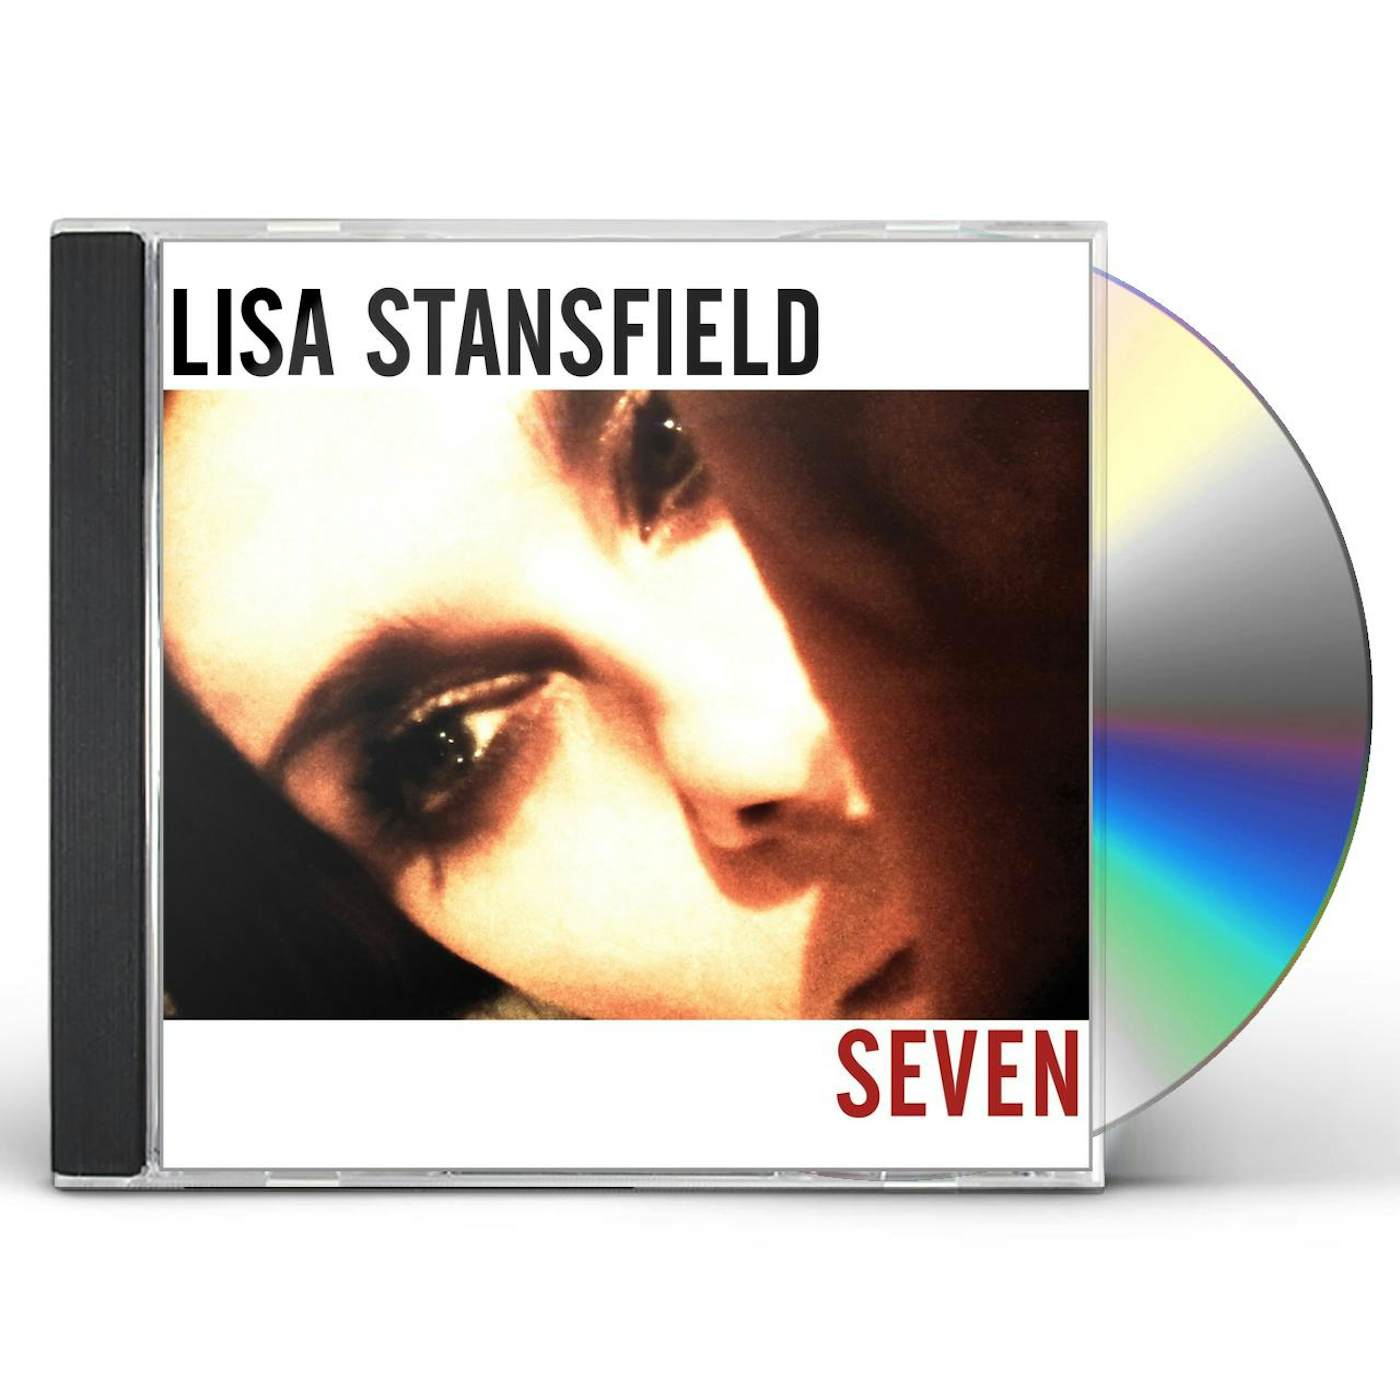 Lisa Stansfield SEVEN (EXPANDED EDITION) CD